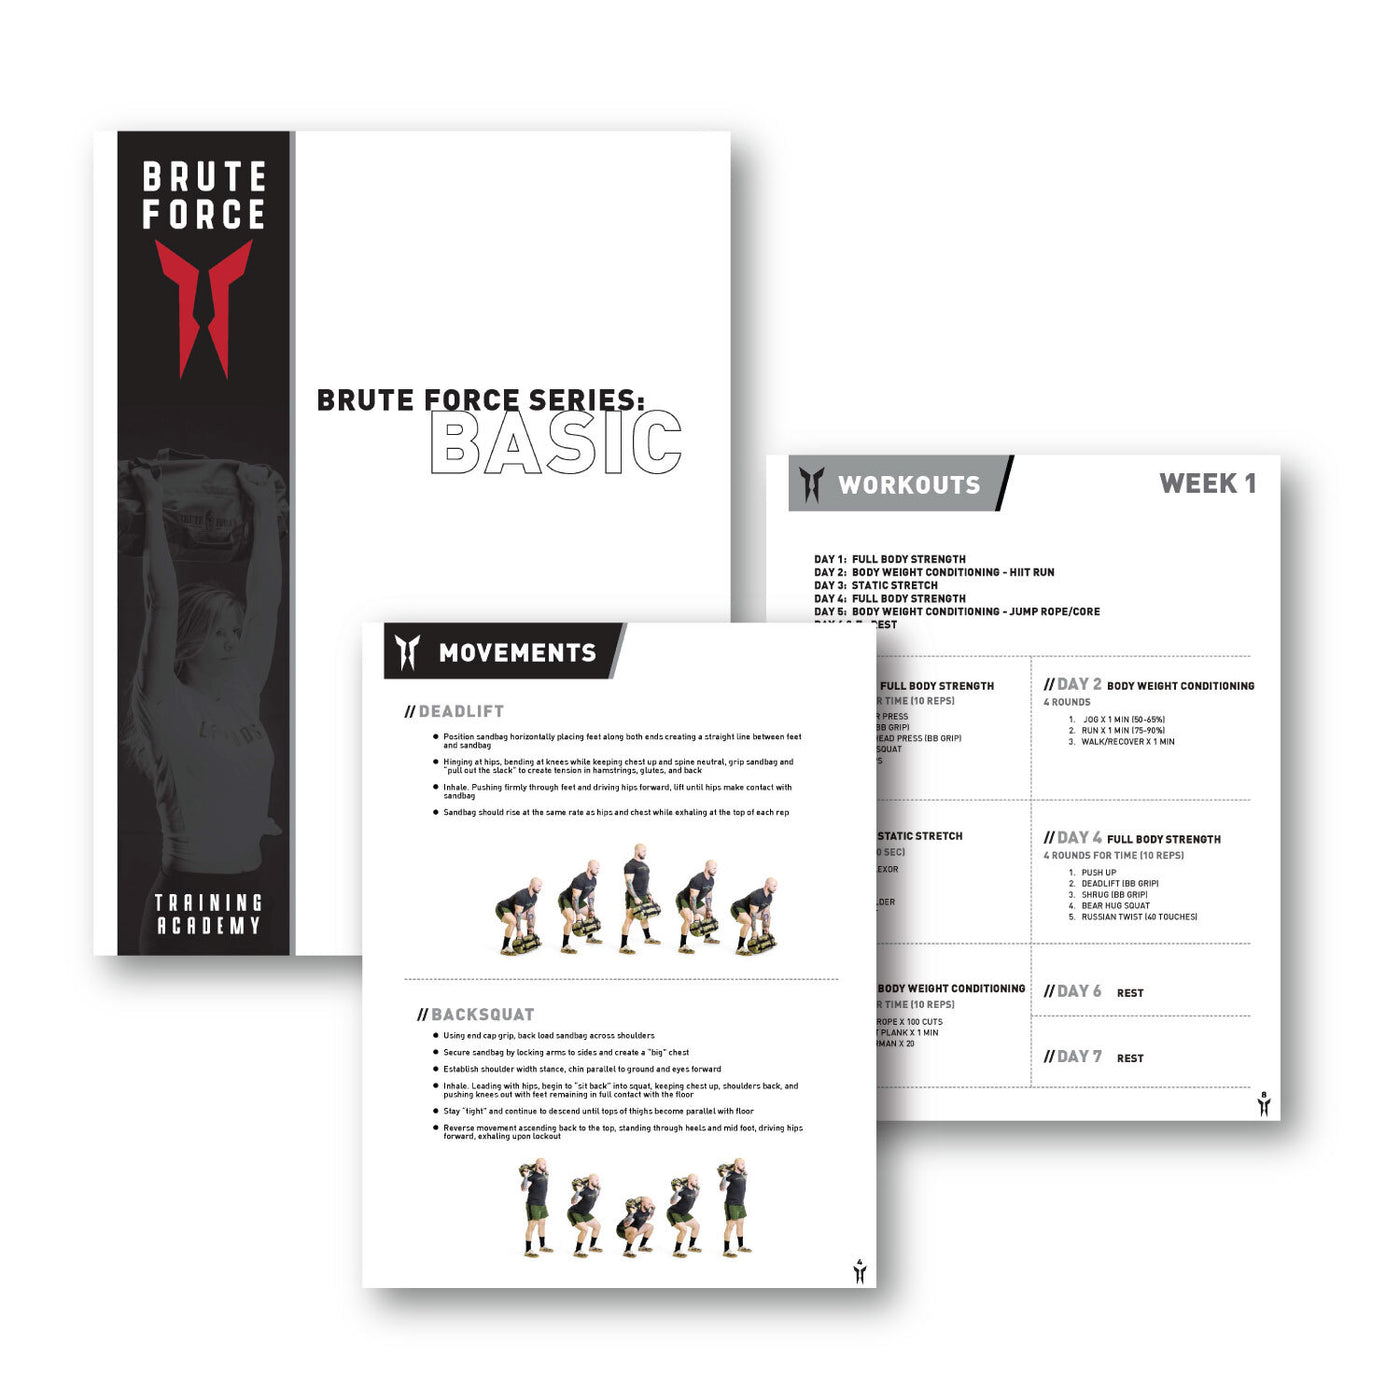 Brute Force Training Plans - Brute Force Training